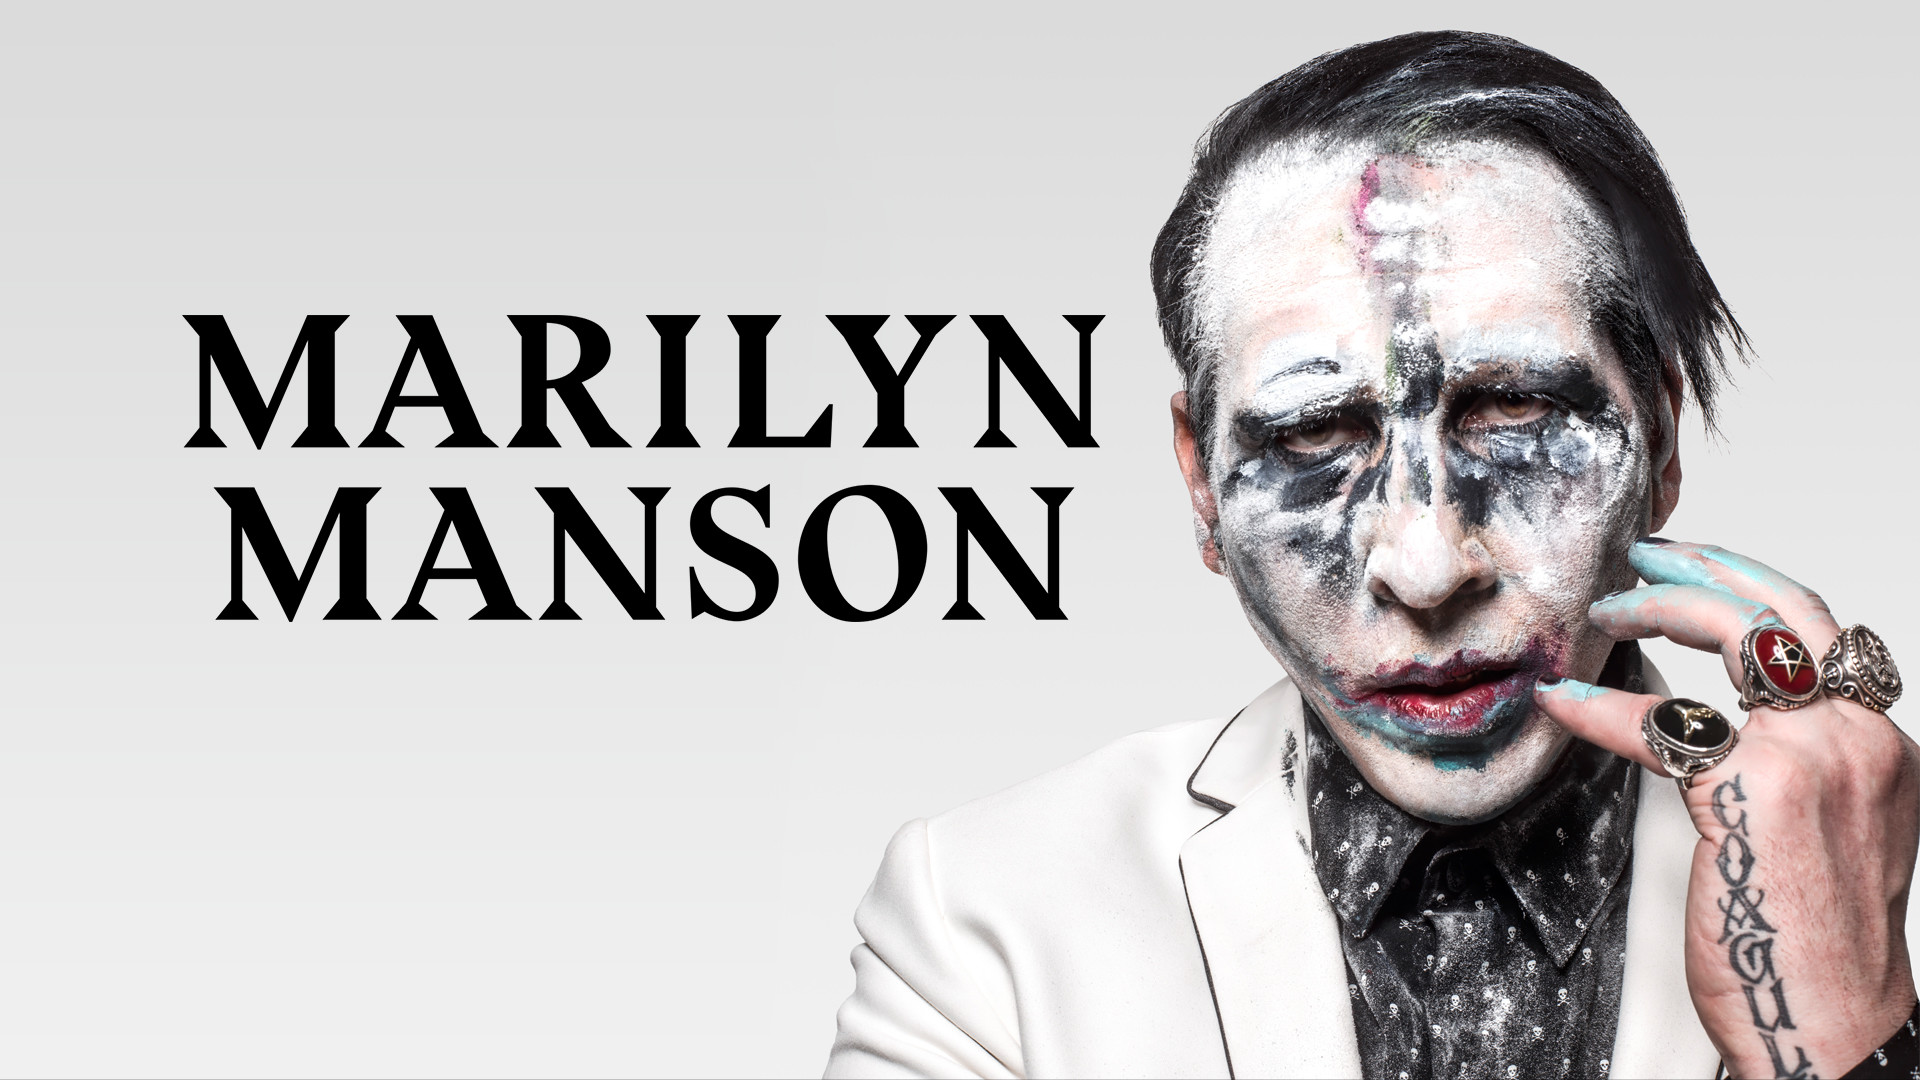 Marilyn Manson Drops New Song, Info About Up-Coming Album [AUDIO]